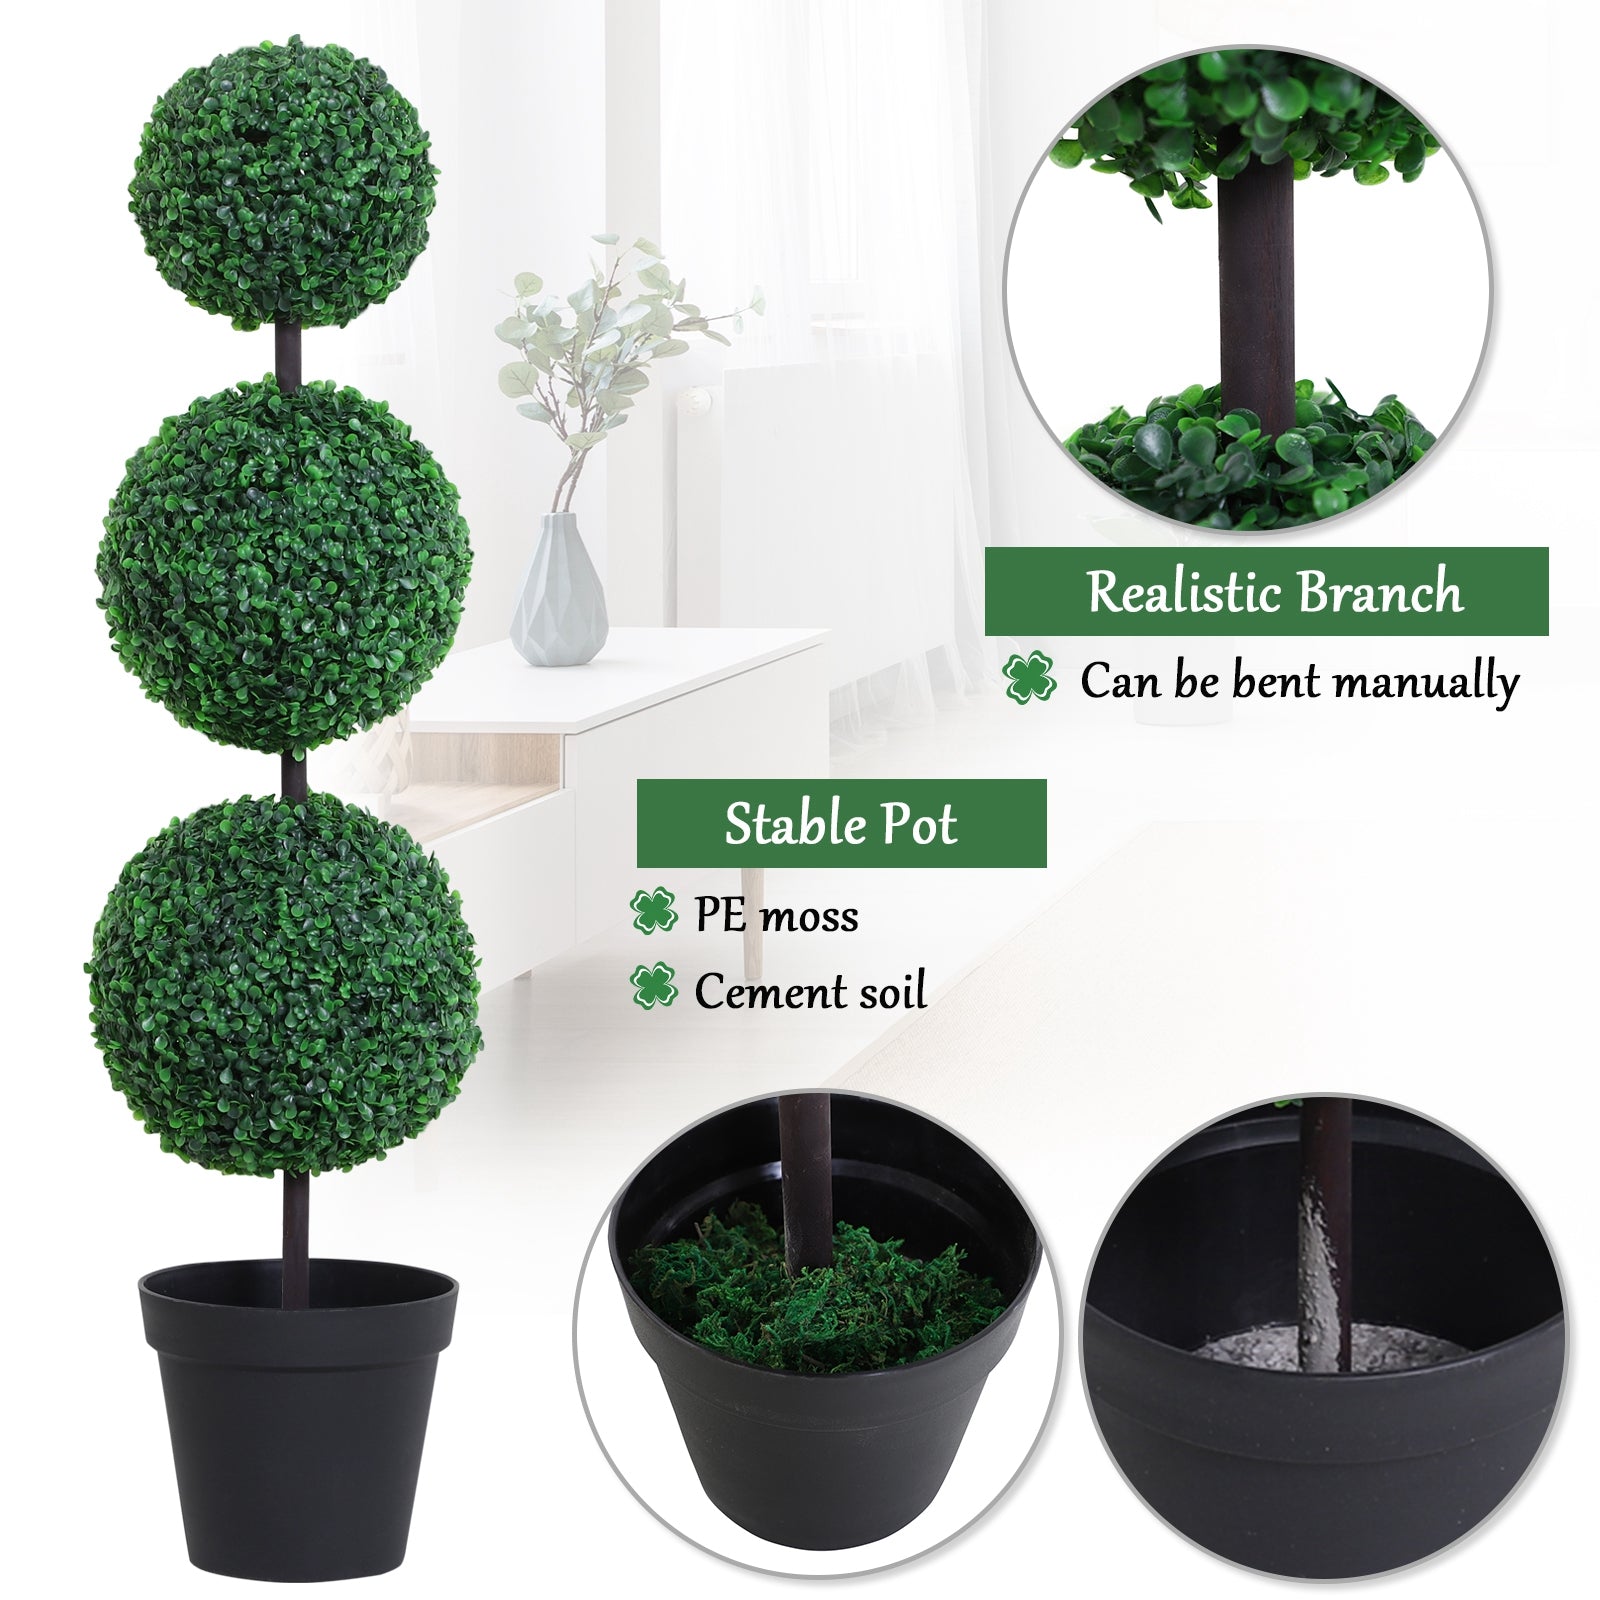 Outsunny Set of 2 Artificial Boxwood Ball Topiary Trees Potted Decorative Plant Outdoor and Indoor Décor (112cm) - Inspirely